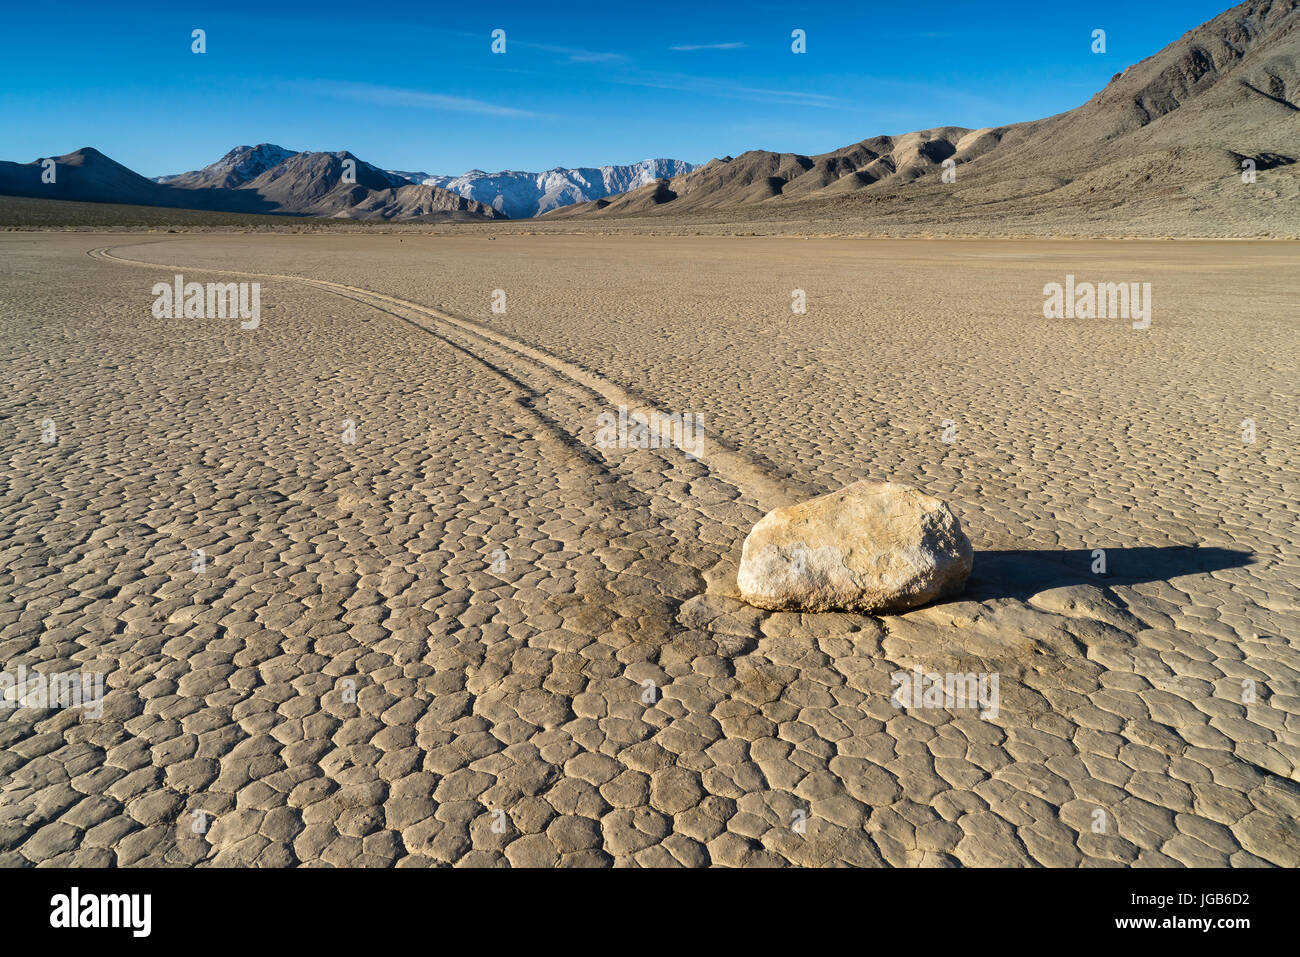 The Racetrack Playa, or The Racetrack, is a scenic dry lake feature with 'sailing stones' that inscribe linear 'racetrack' imprints. It is located abo Stock Photo